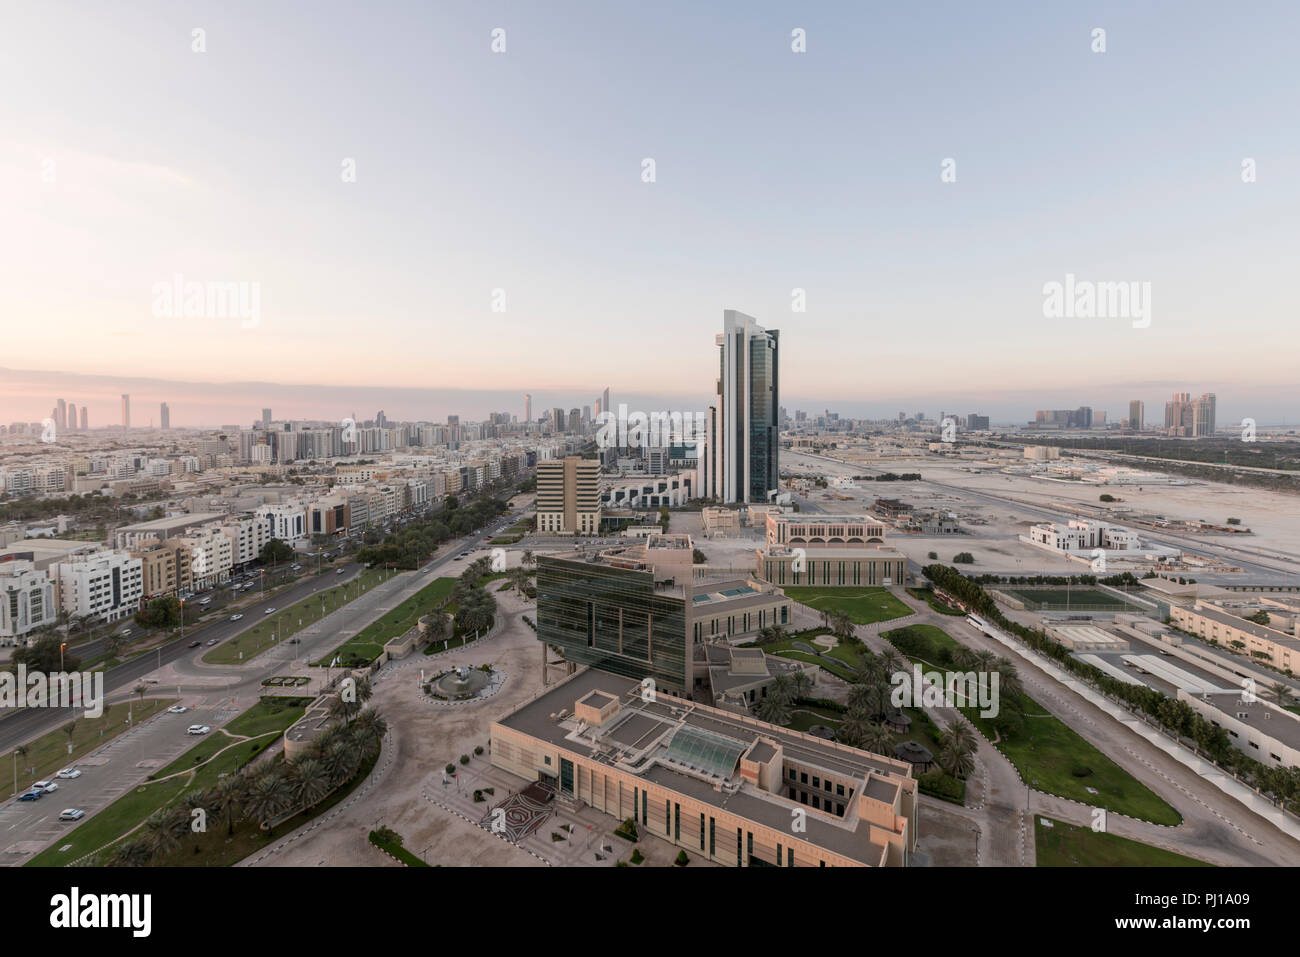 Looking towards downtown Abu Dhabi, with a view of skyscrapers and low-rise buildings, on the main Abu Dhabi Island, UAE Stock Photo